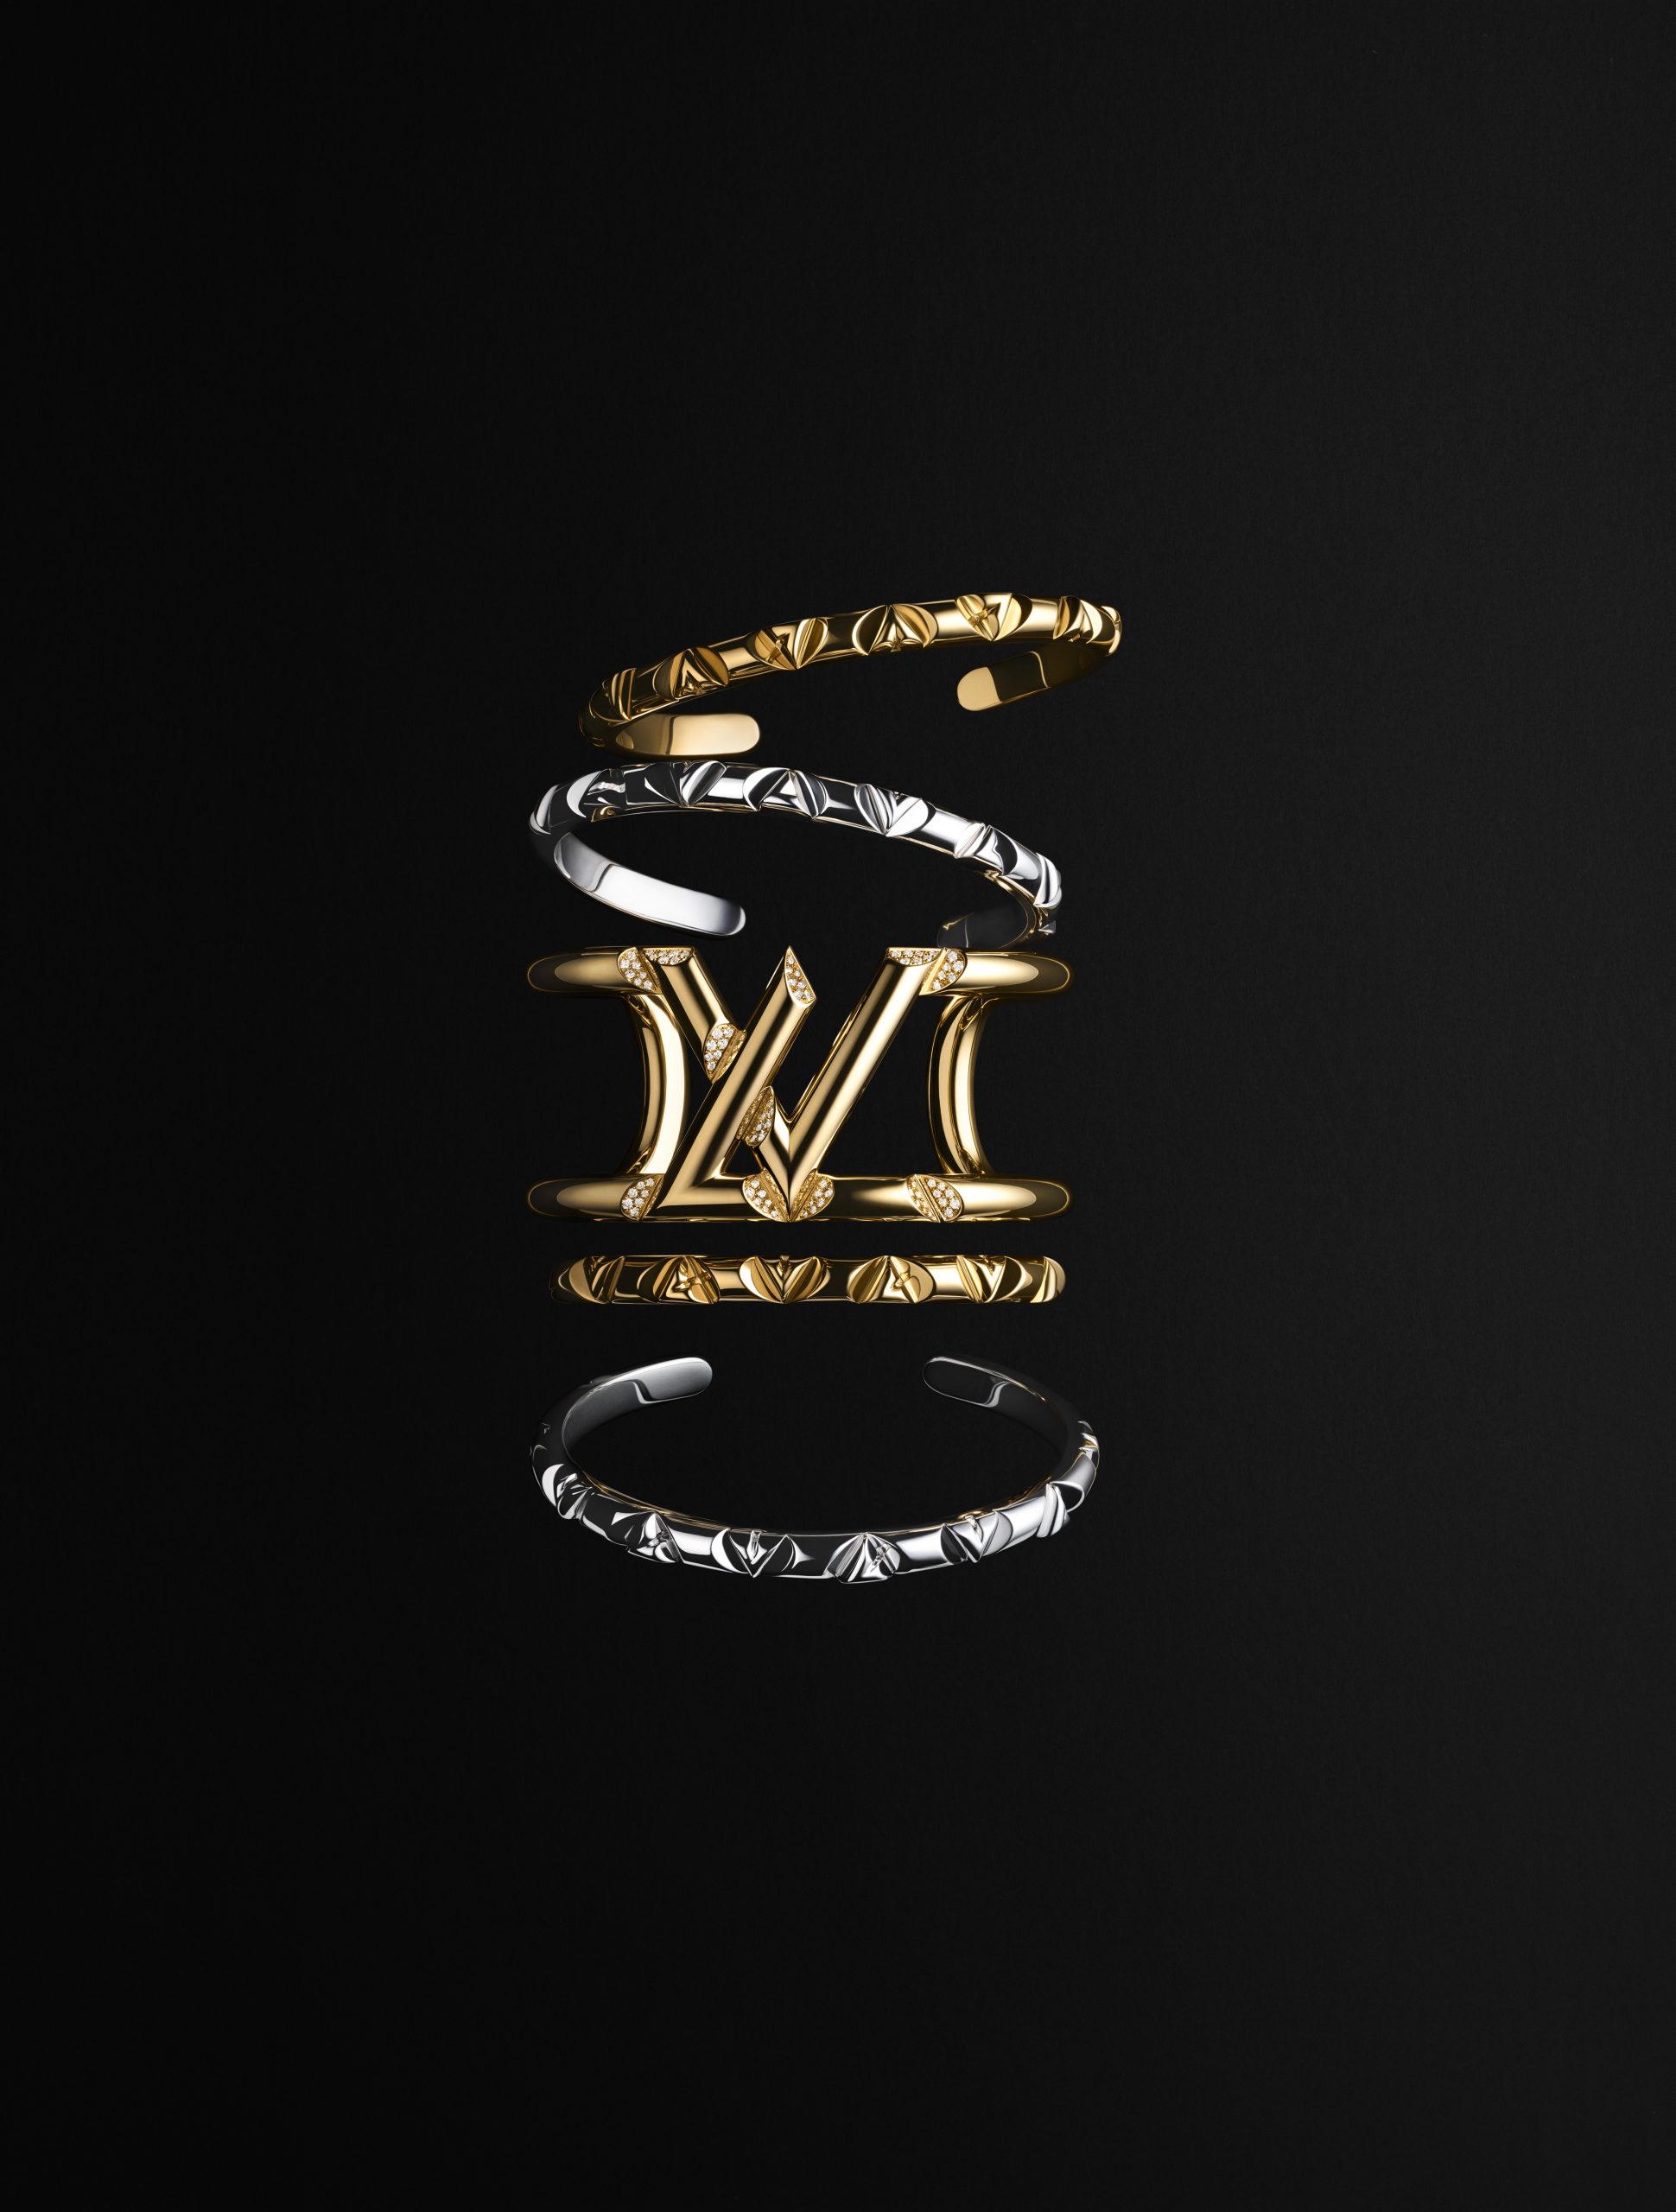 Lv Volt Mesh Ring, Yellow Gold And Diamonds